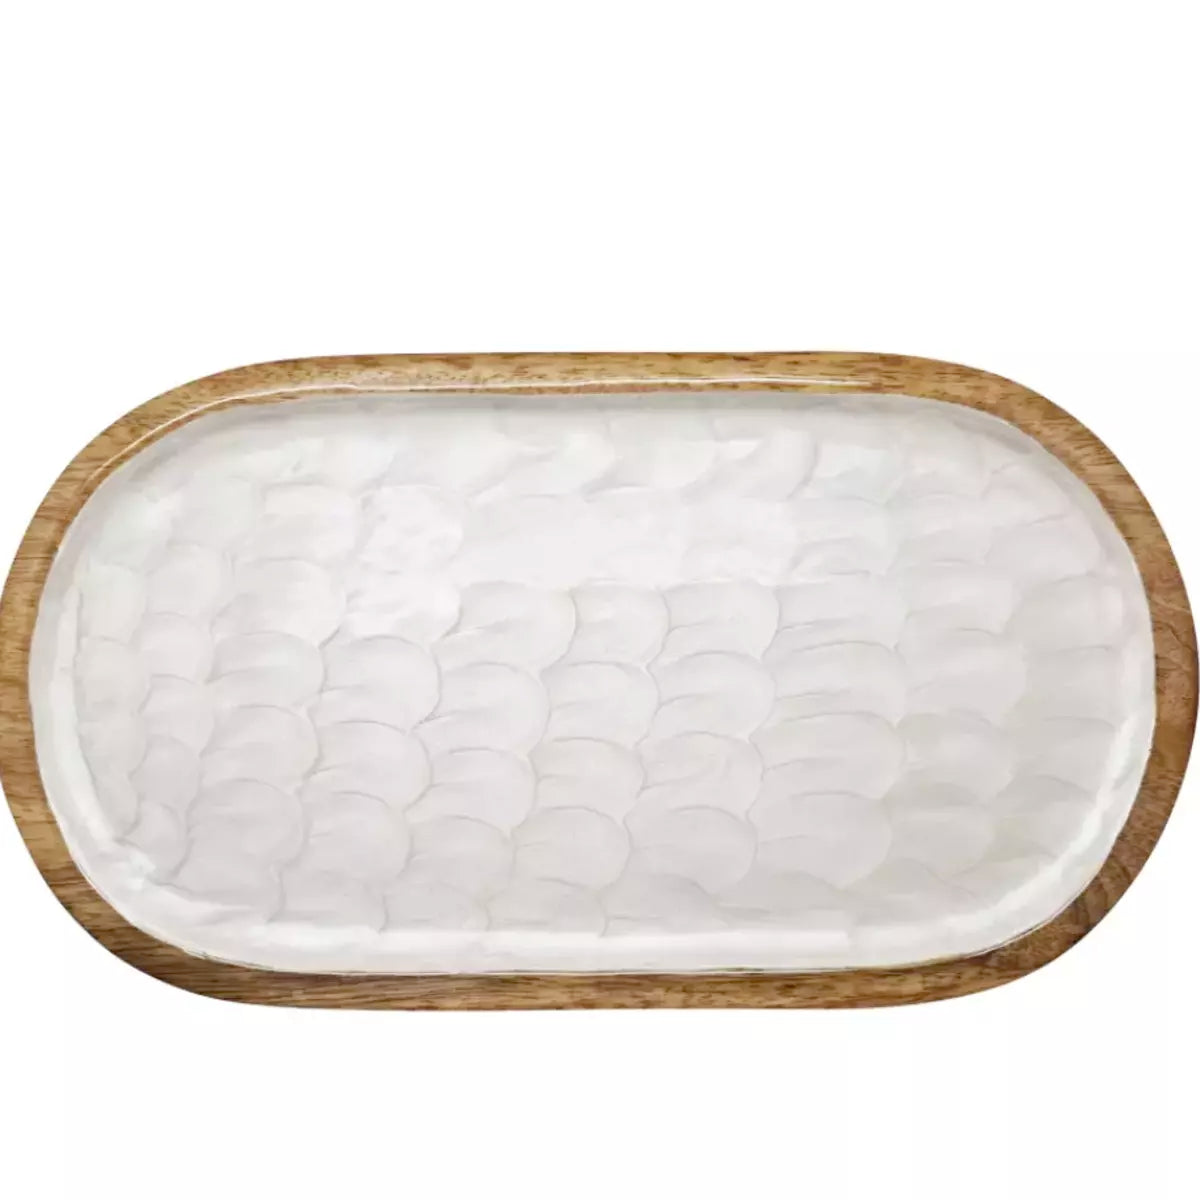 A Como Oval Serving Tray with a j.elliot mango wood frame features an embossed pearl design.